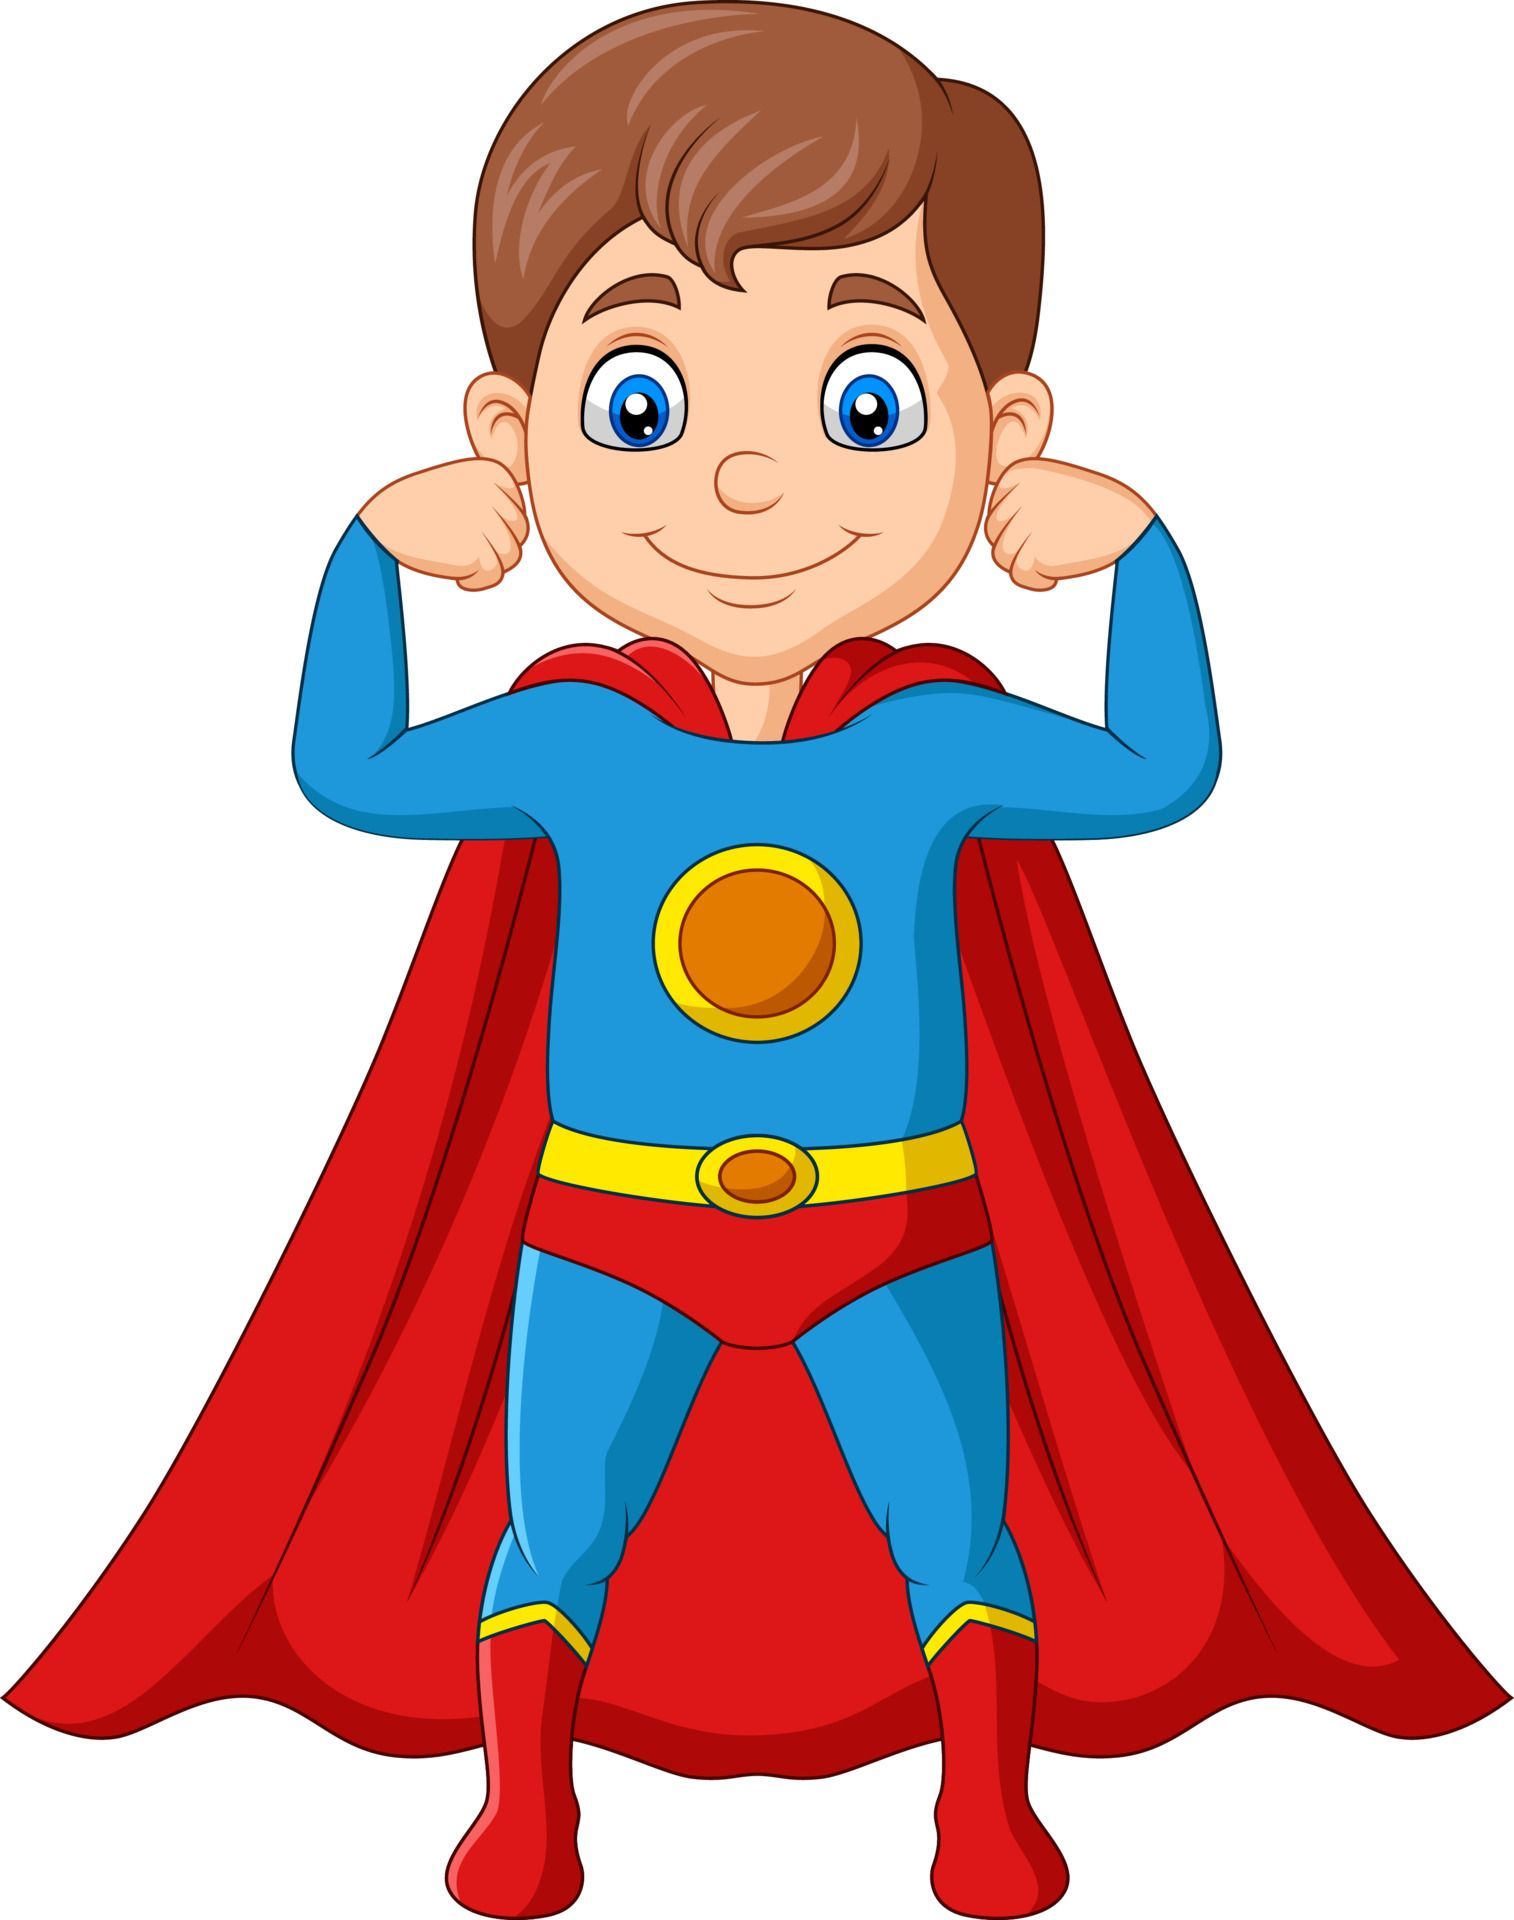 A cartoon boy in a superhero costume is flexing his muscles.